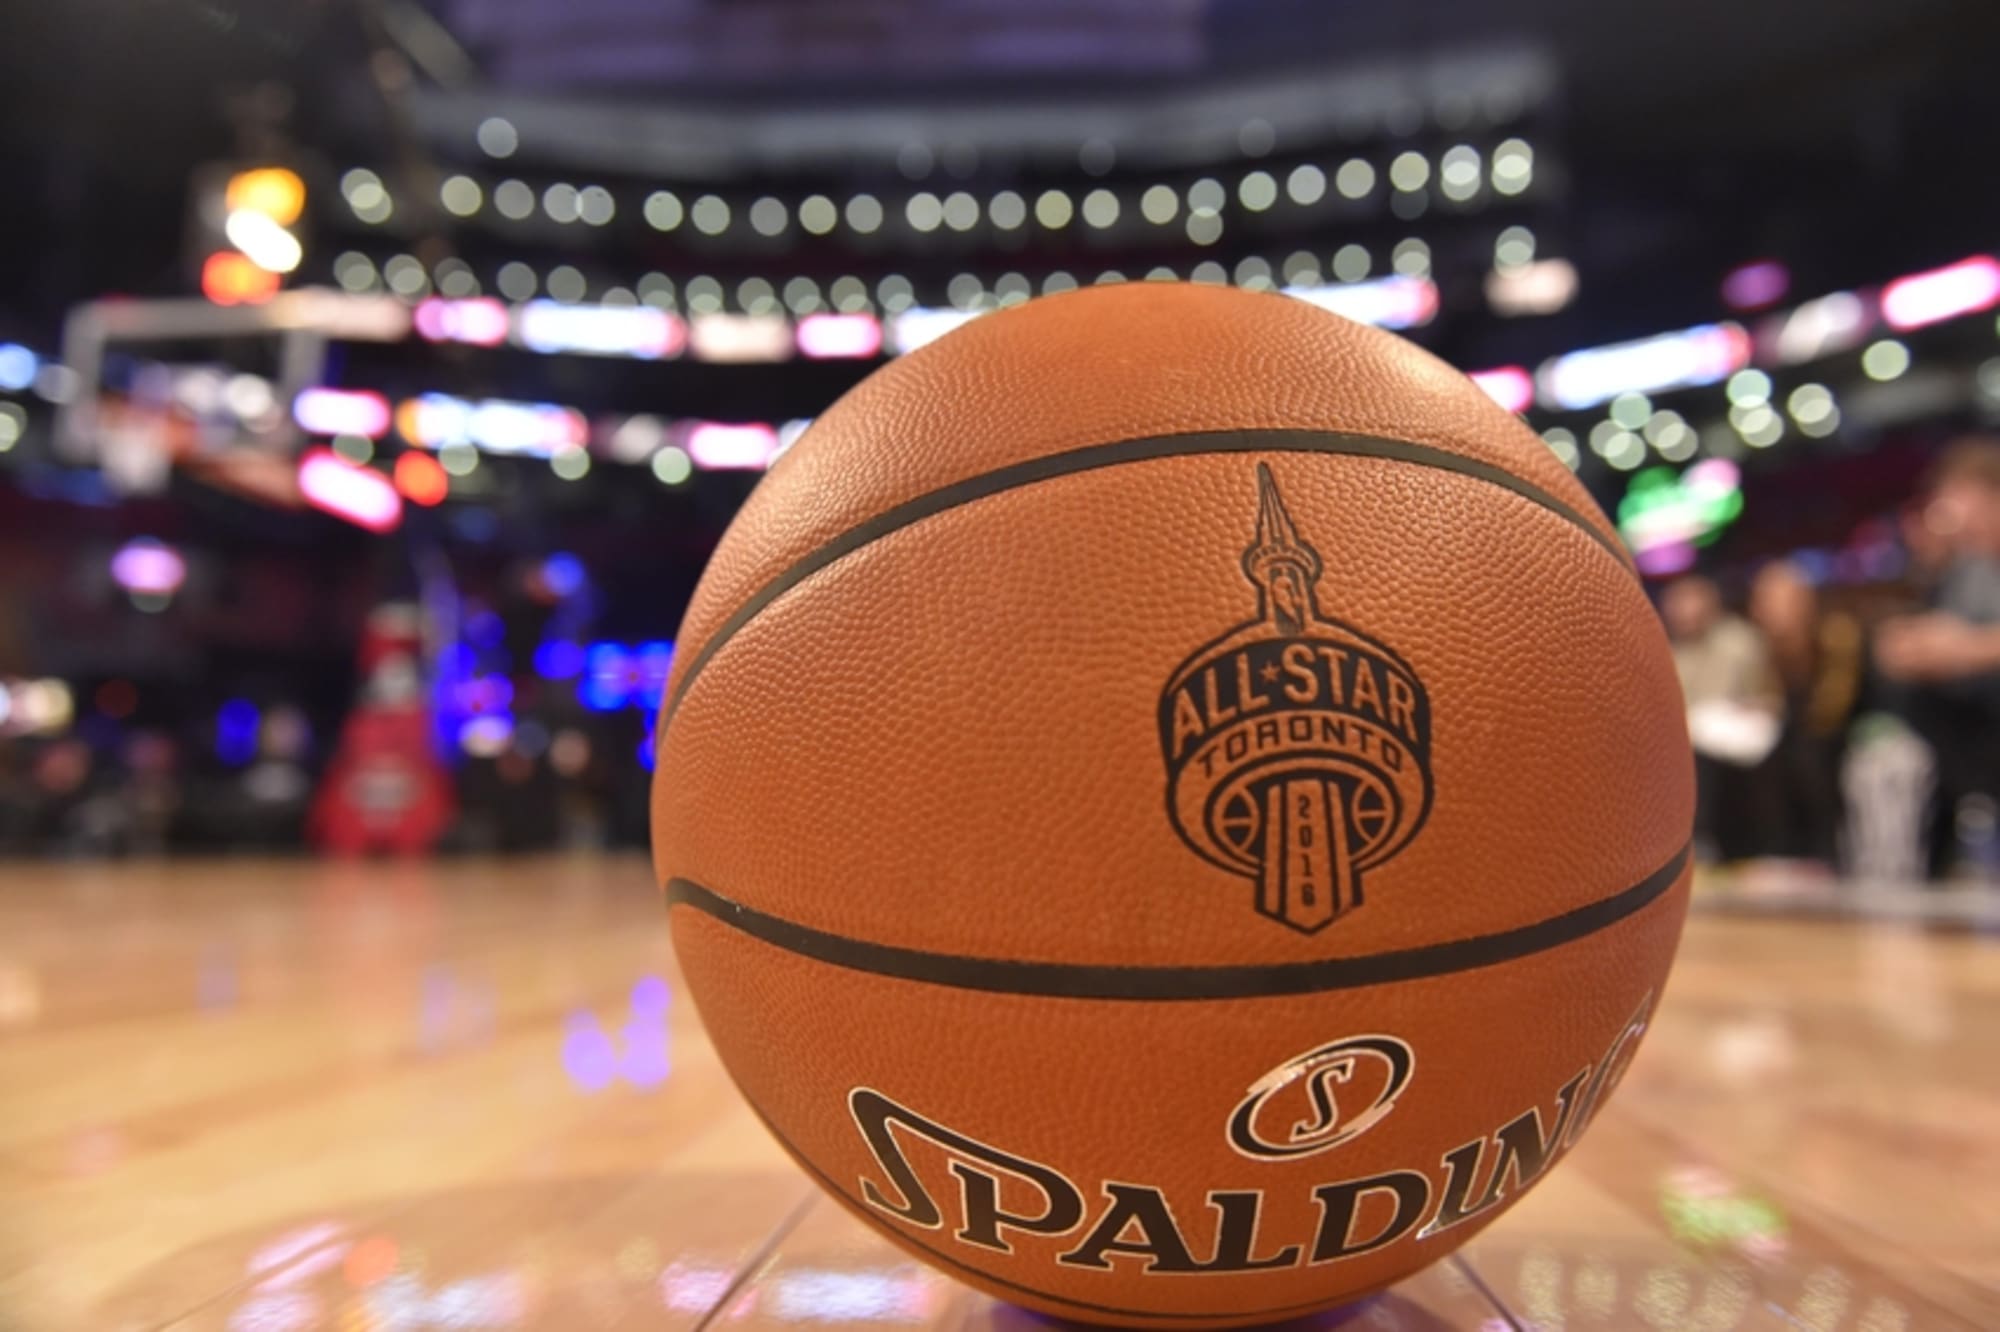 stream nba all star game online free